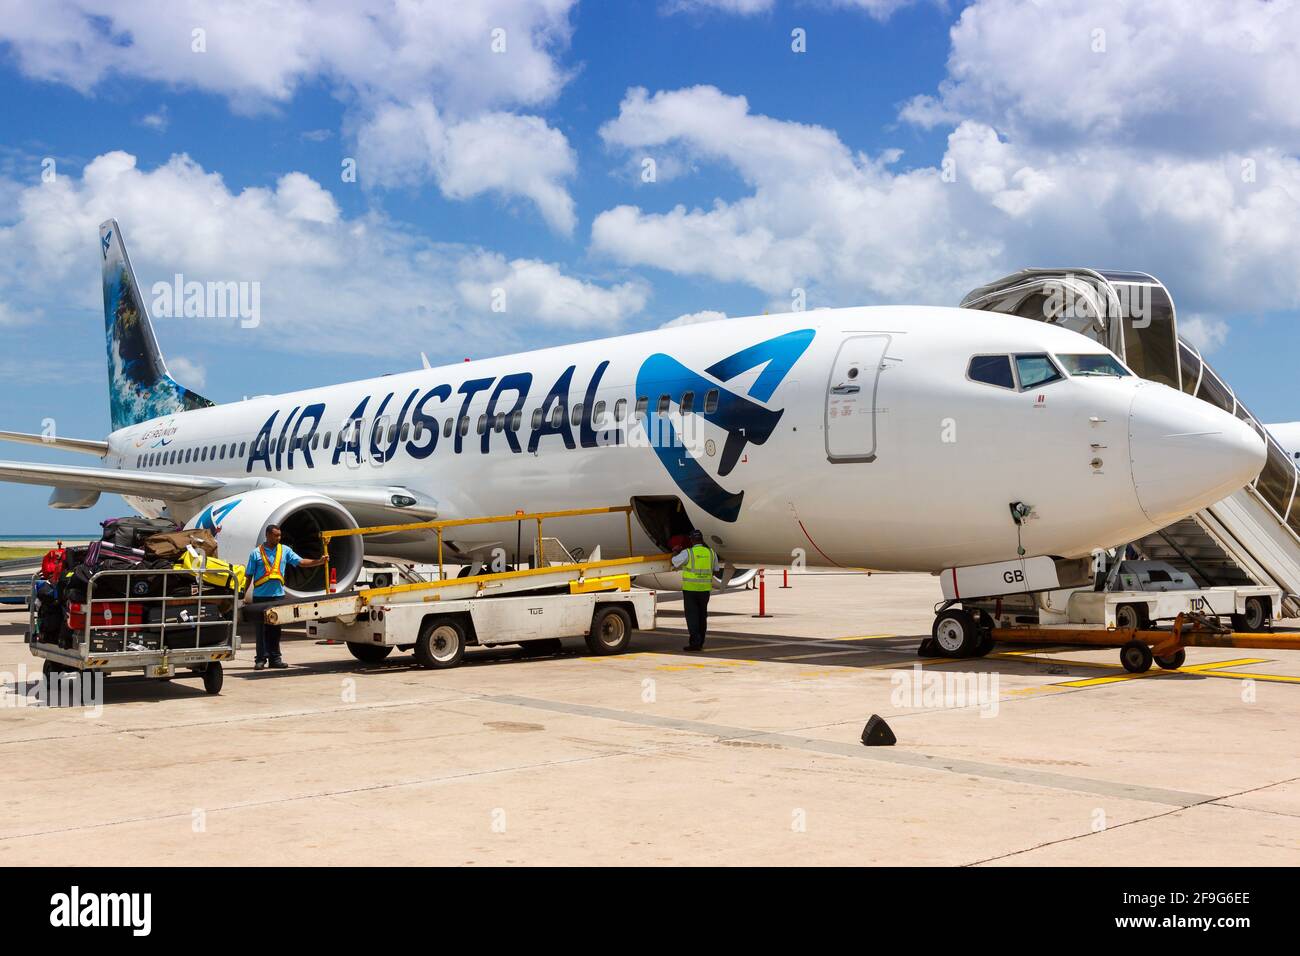 Mahe, Seychelles - November 26, 2017: Air Austral Boeing 737-800 airplane at Seychelles International Airport (SEZ) in the Seychelles. Boeing is an Am Stock Photo